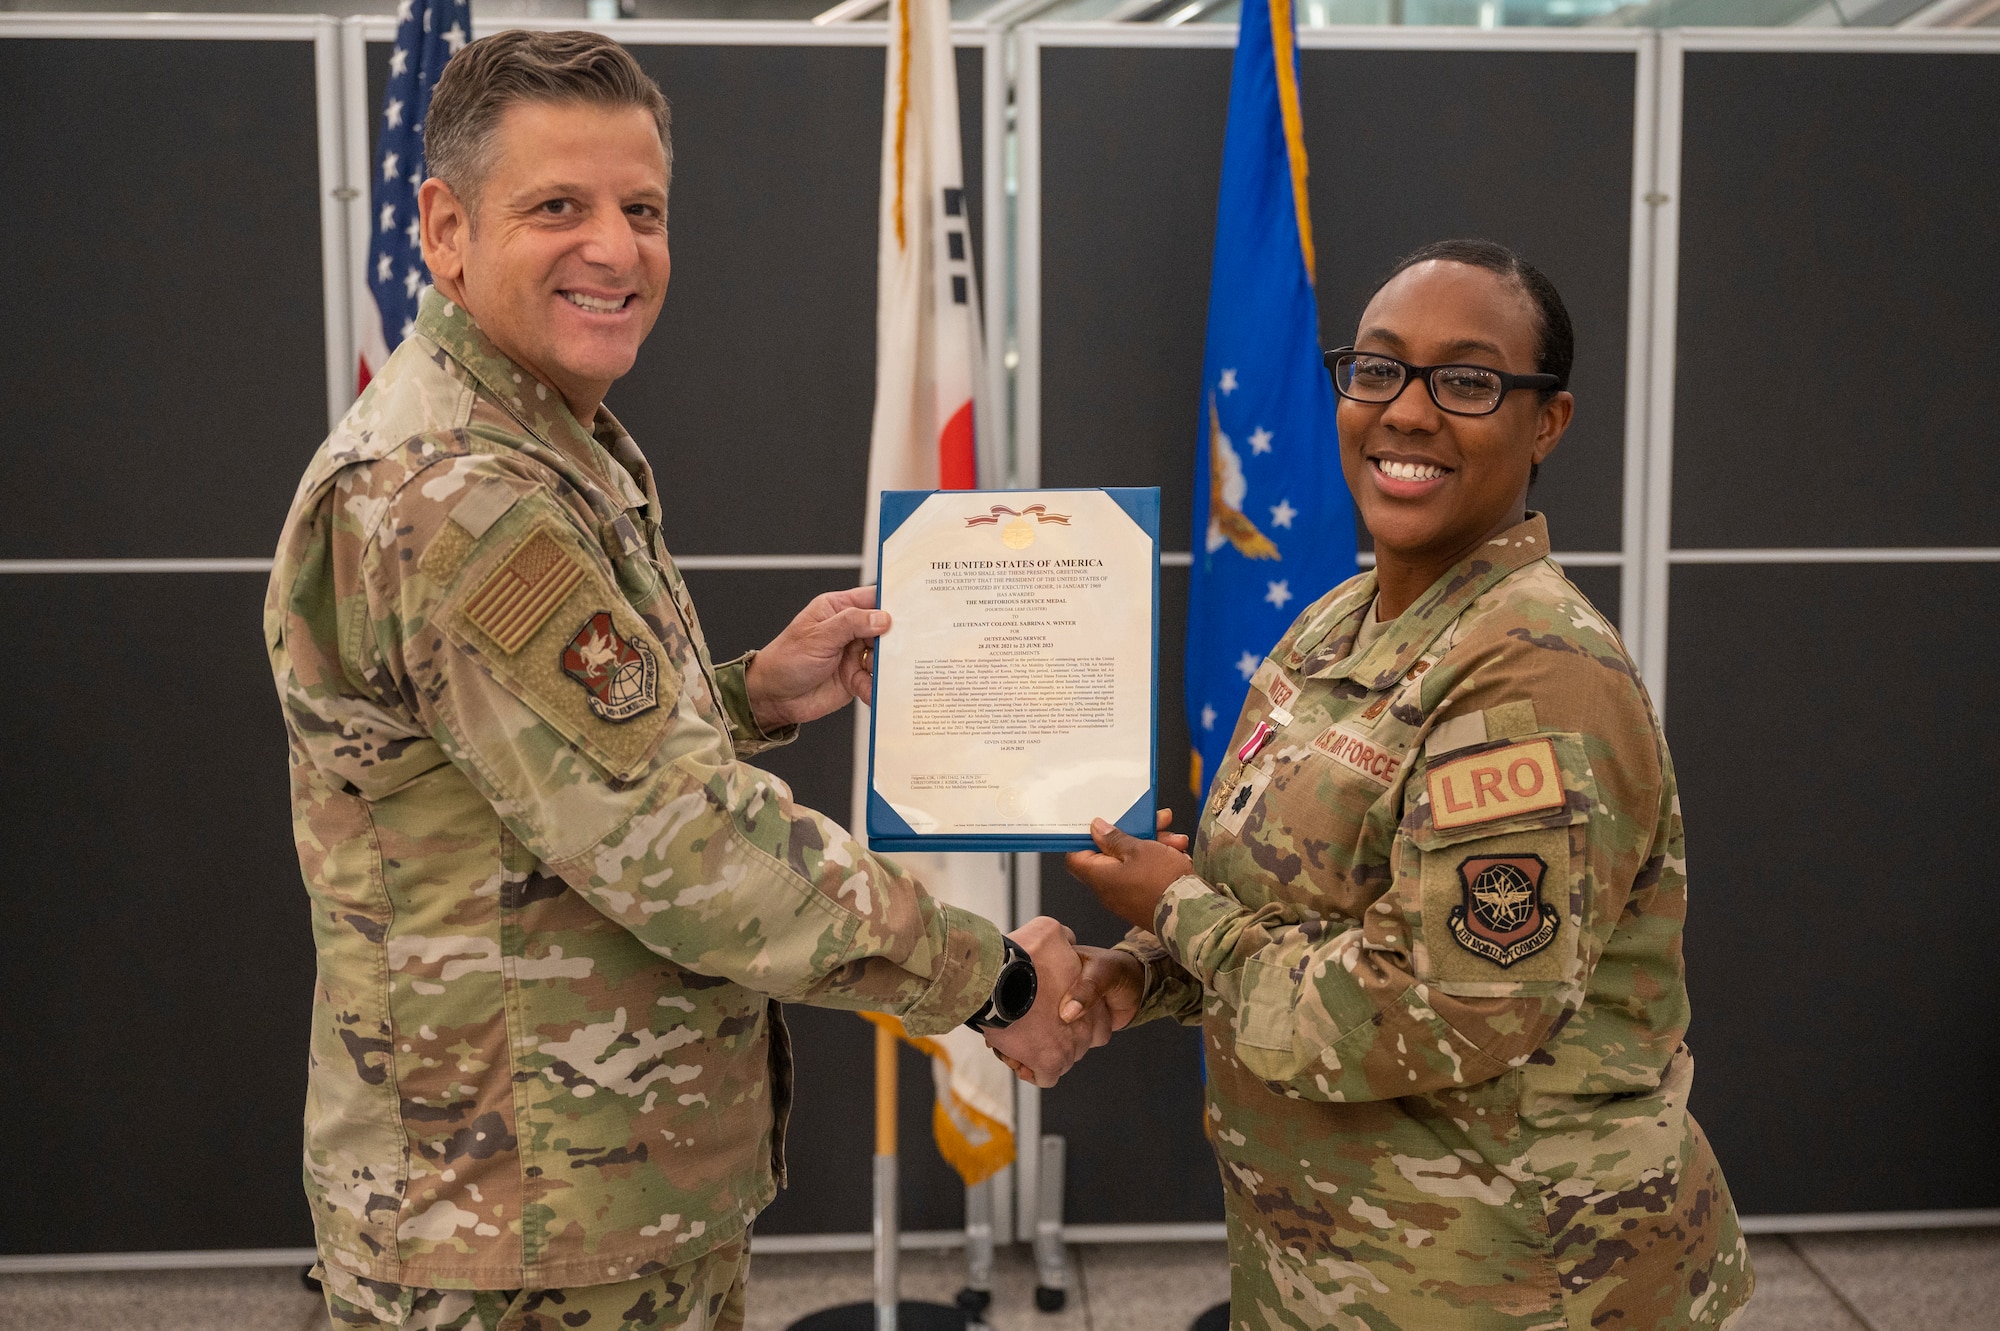 U.S. Air Force Col. Christopher Kiser, left, 515th Air Mobility Operations Group commander, presents a Meritorious Service Medal to Lt. Col. Sabrina Winter, 731st Air Mobility Squadron outgoing commander, at Osan Air Base, Republic of Korea, June 23, 2023. The MSM is a military decoration awarded by various branches of the Armed Forces to recognize distinguished or outstanding meritorious service. (U.S. Air Force photo by Senior Airman Aaron Edwards)